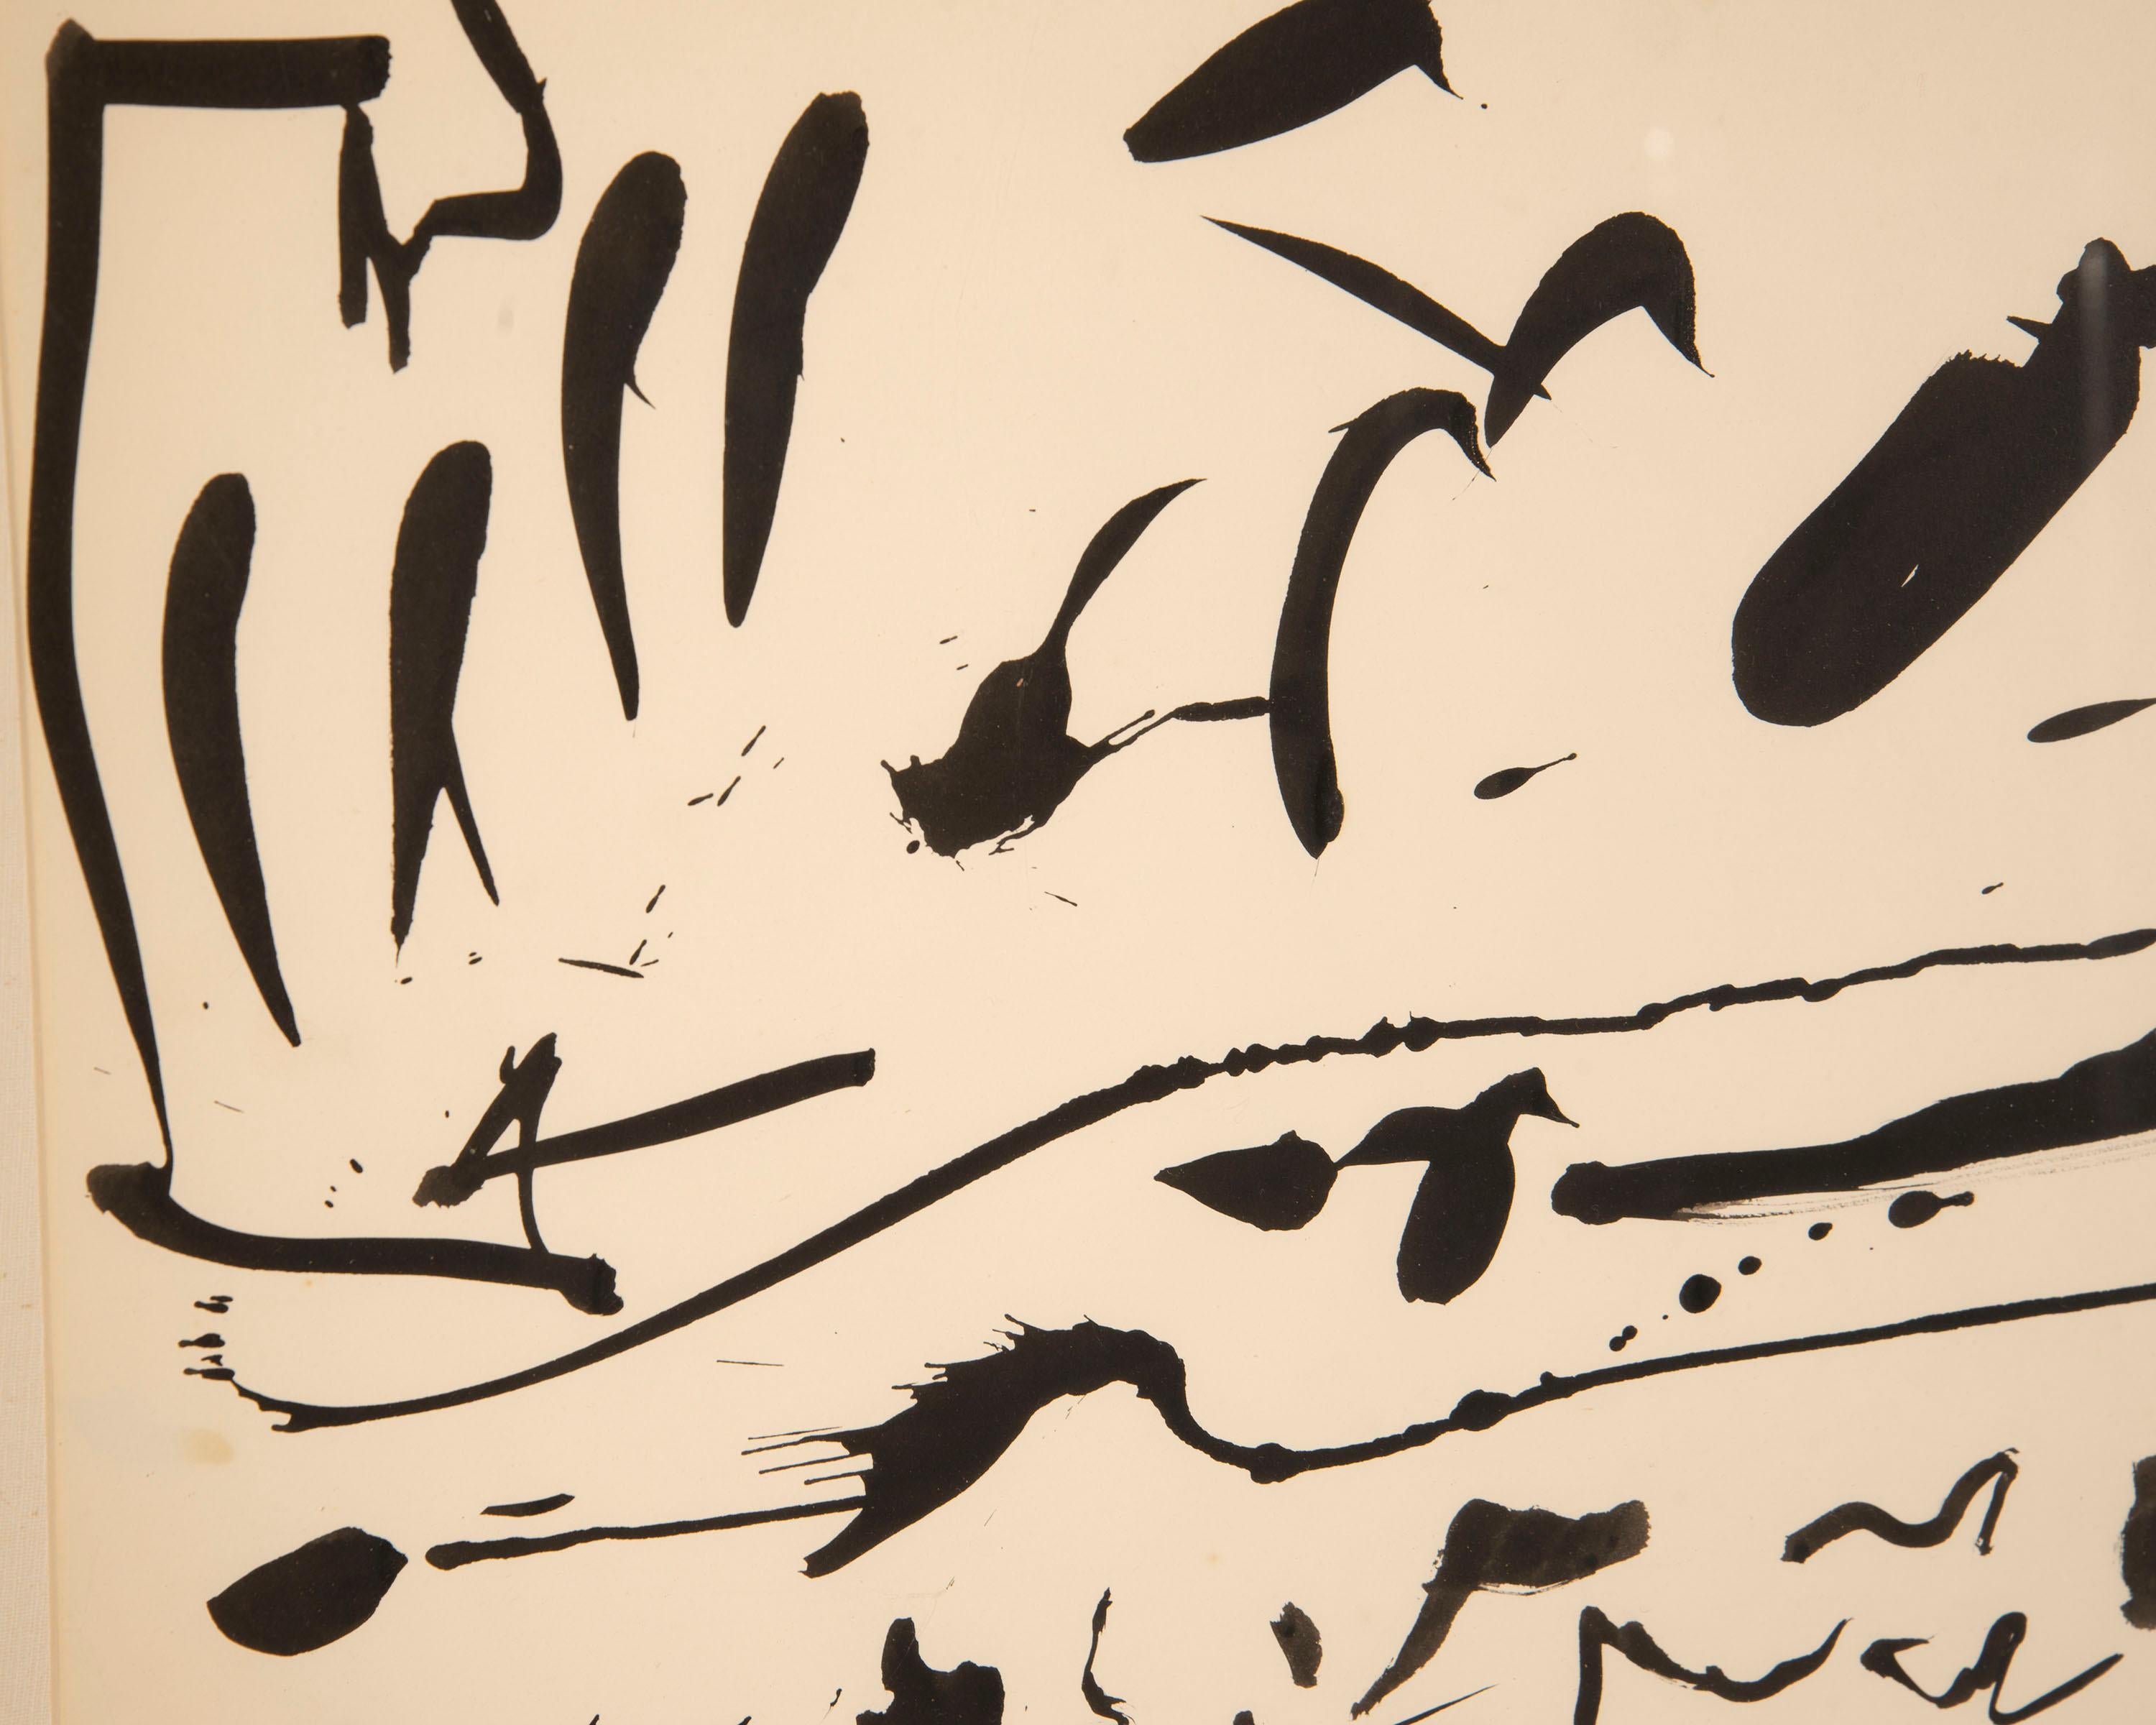 An abstract ink painting on paper by American artist Harry Hilson. Dated 1962, this expressive work uses black brushstrokes that dance across the paper. Signed and dated to the lower right corner, the painting is displayed in a wood frame and an